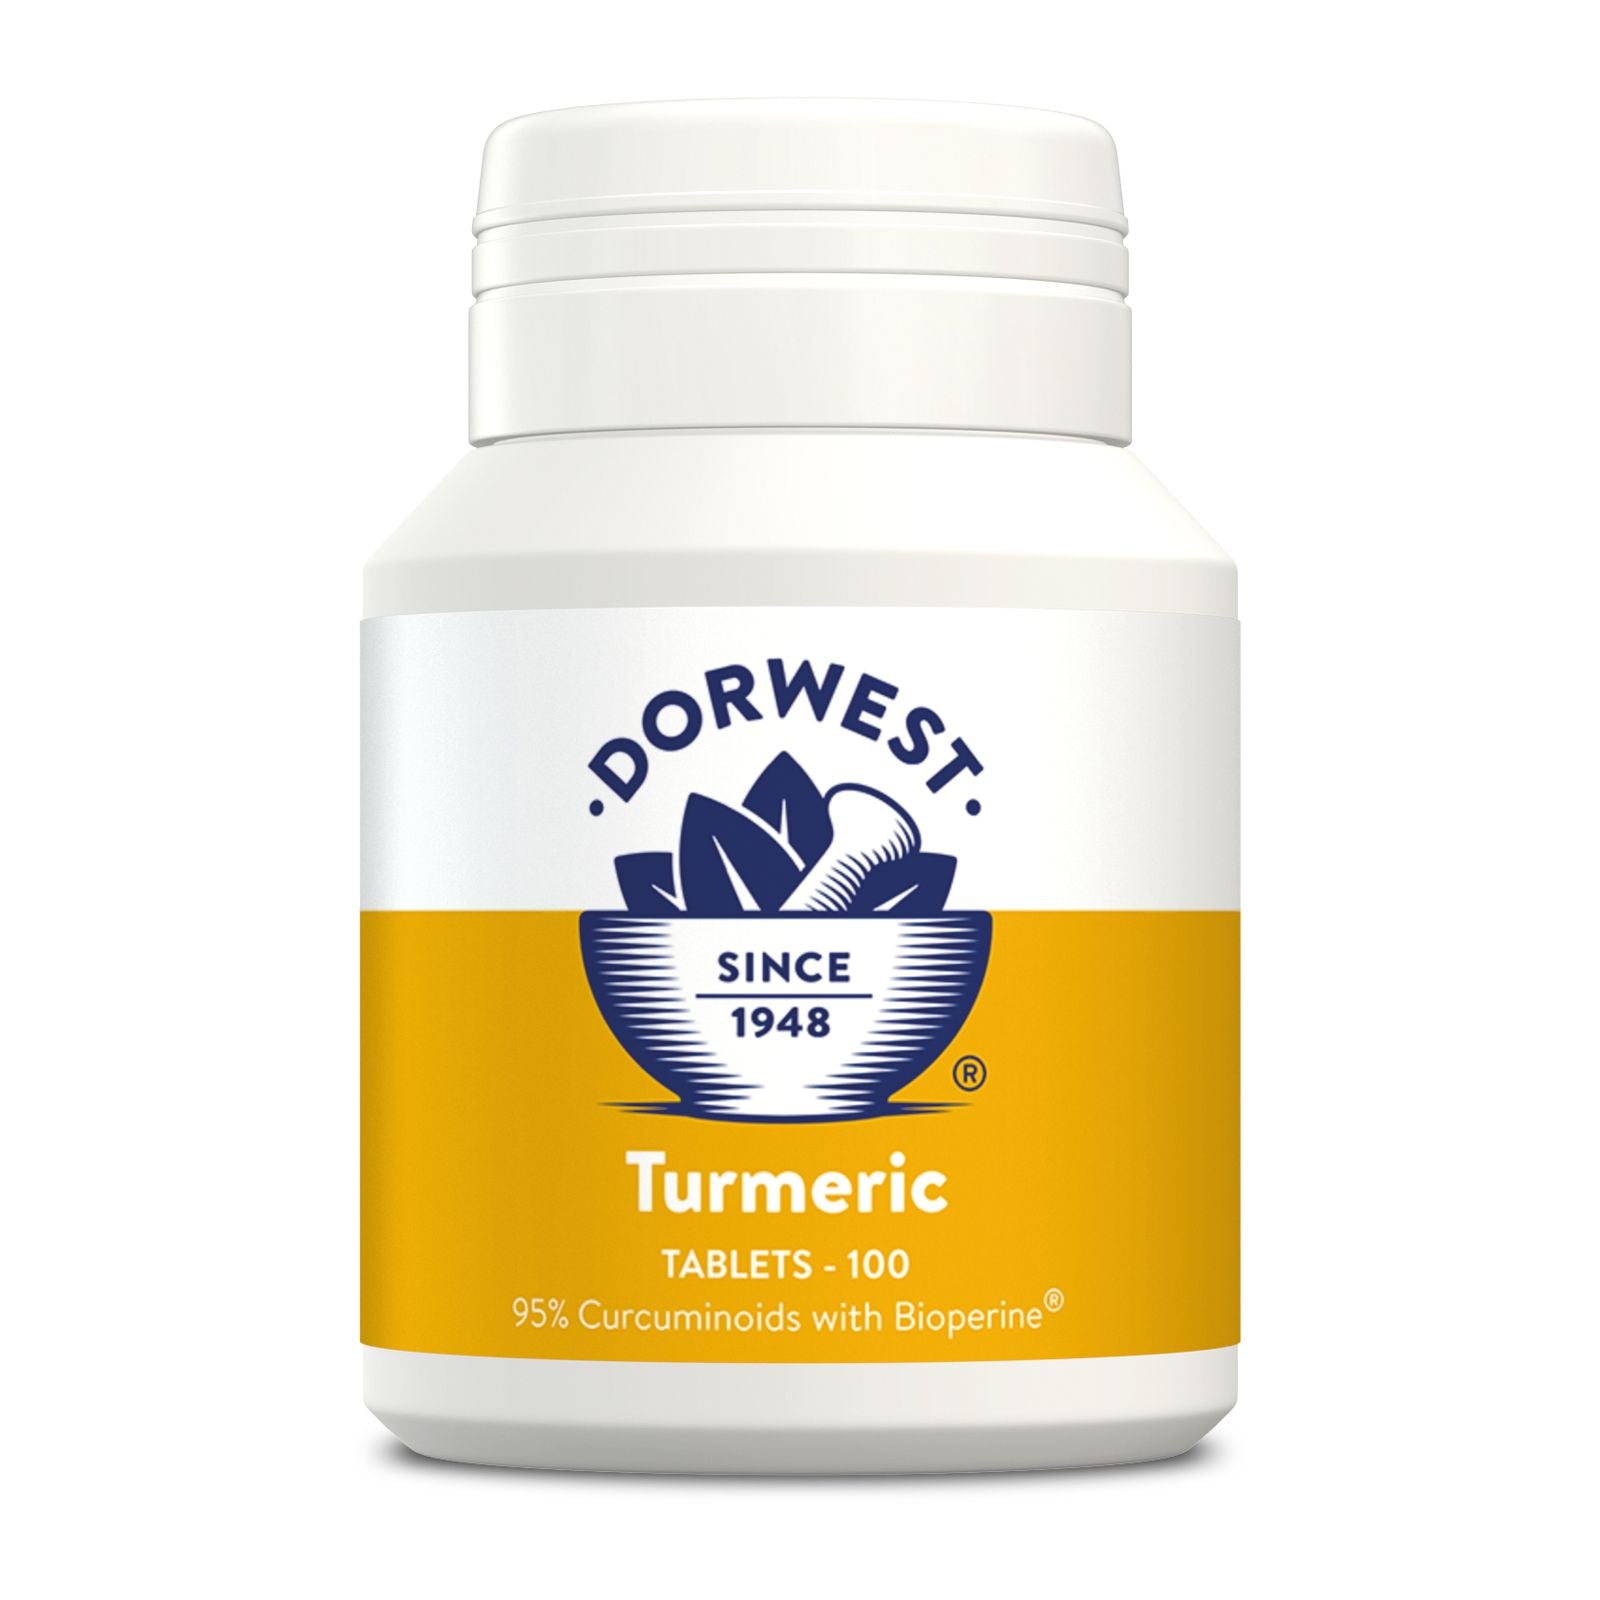 Dorwest Turmeric Tablets For Dogs & Cats